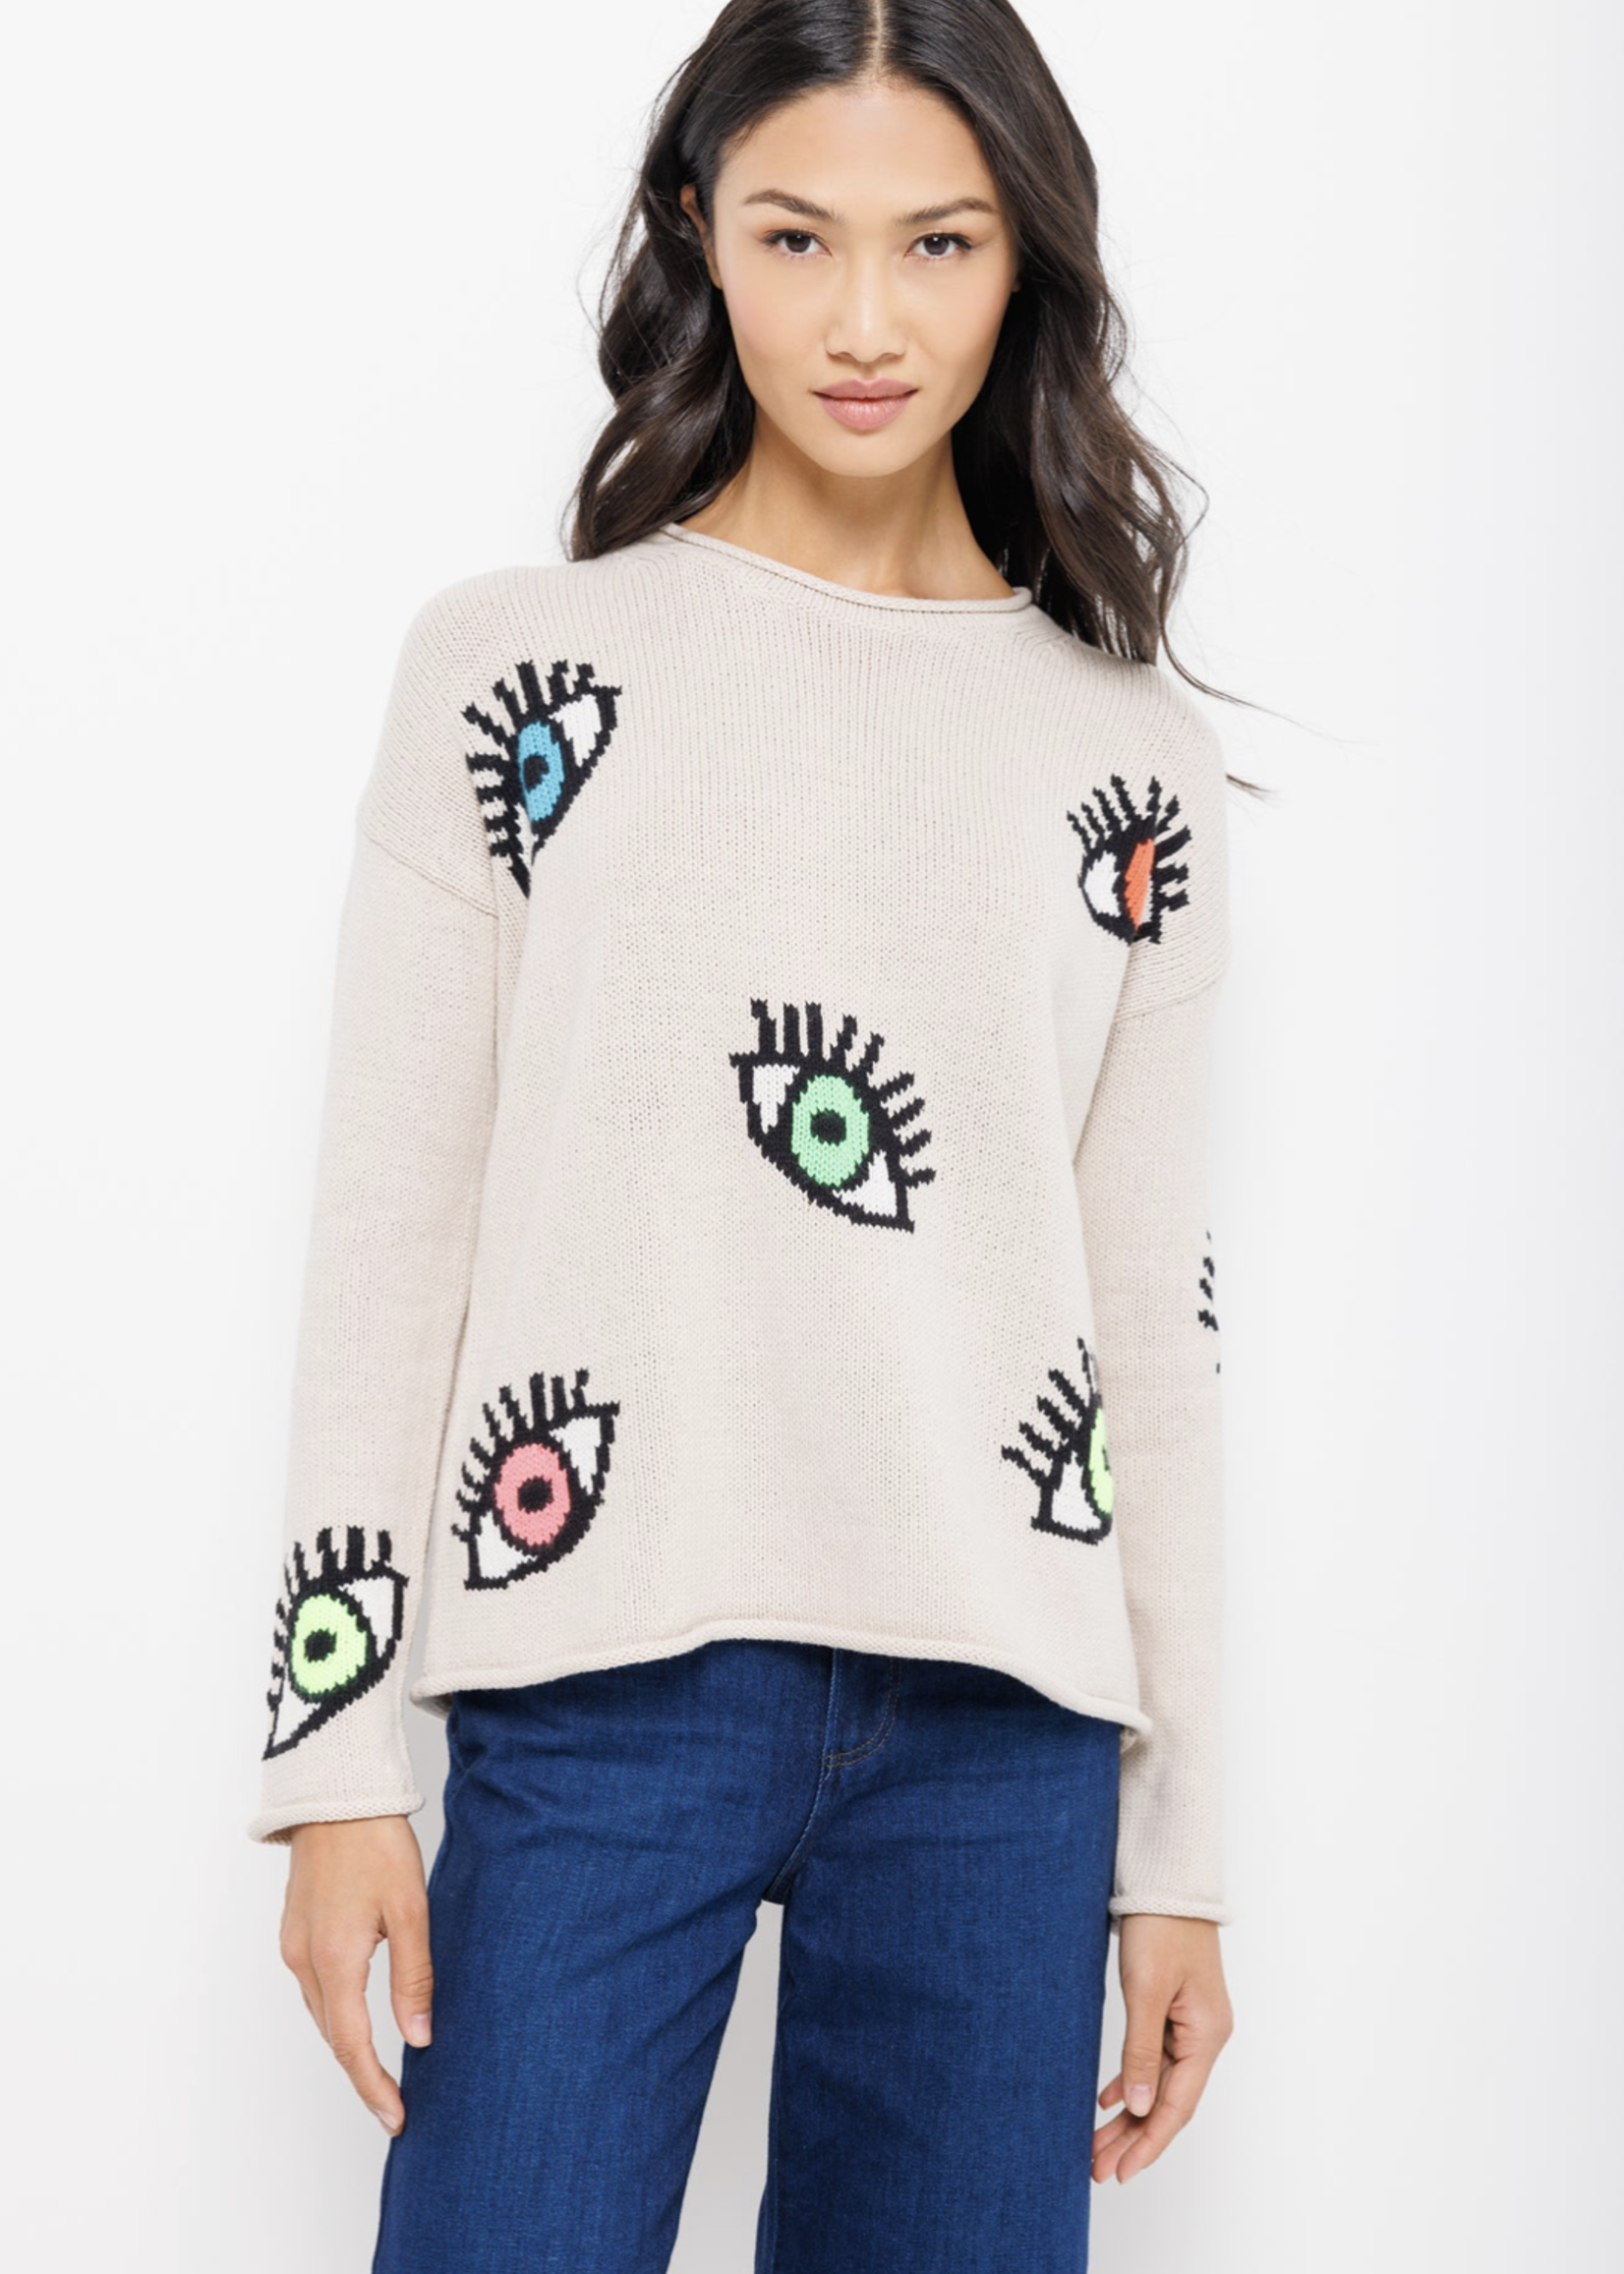 LISA TODD EYES ON YOU SWEATER